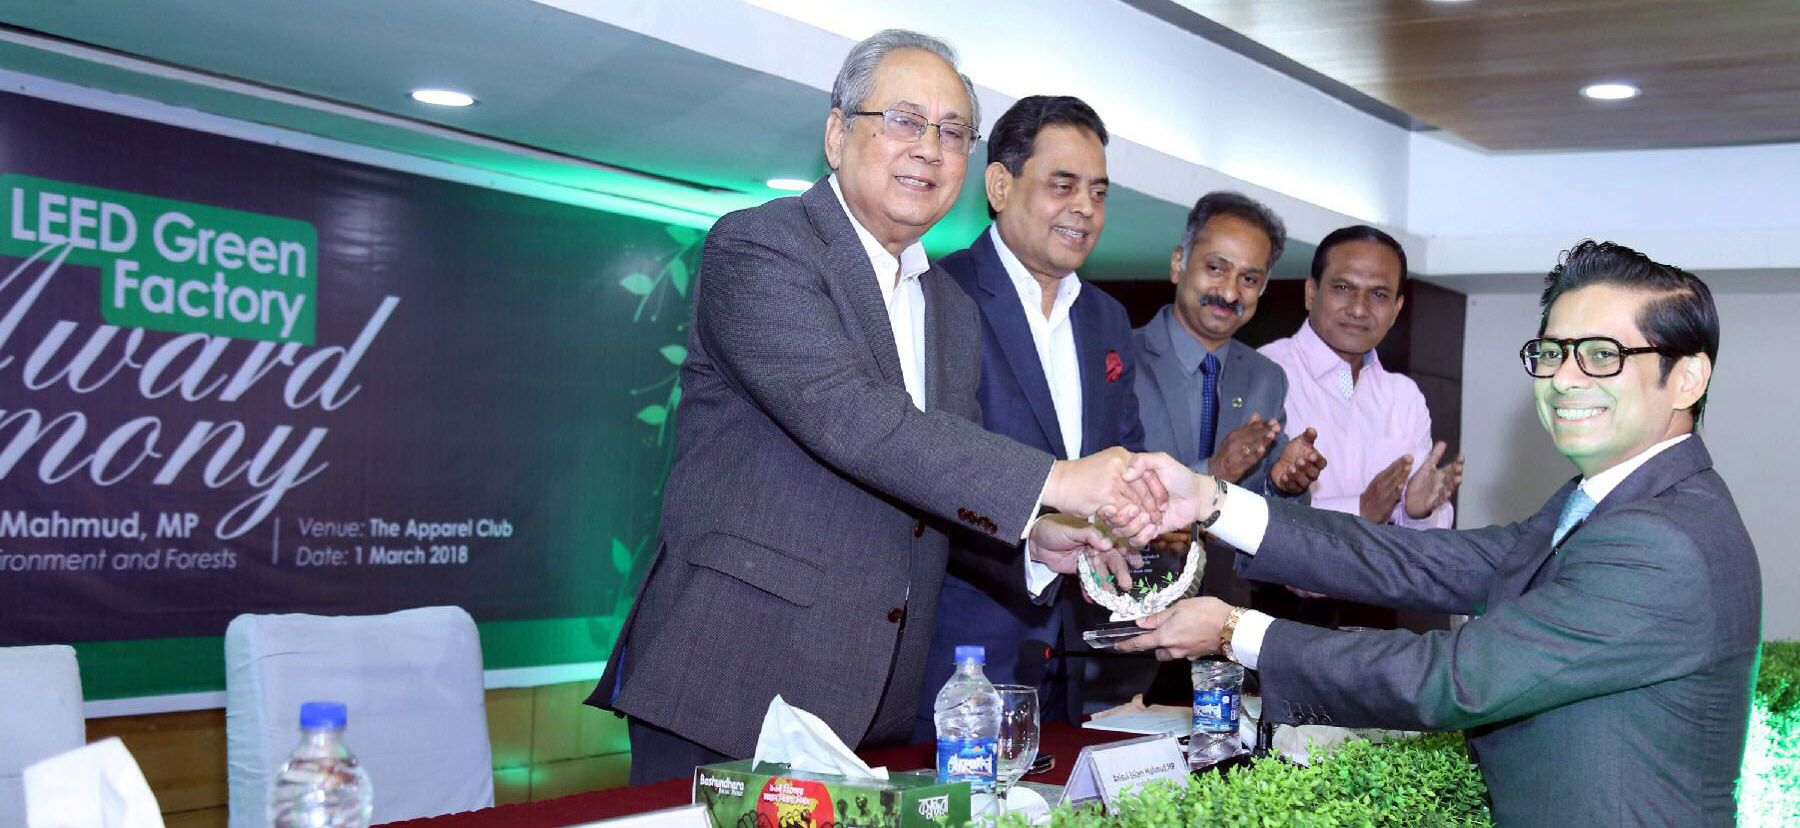 Mr. Miran Ali, MD, received the award of LEED Platinum Certified Factories from BGMEA